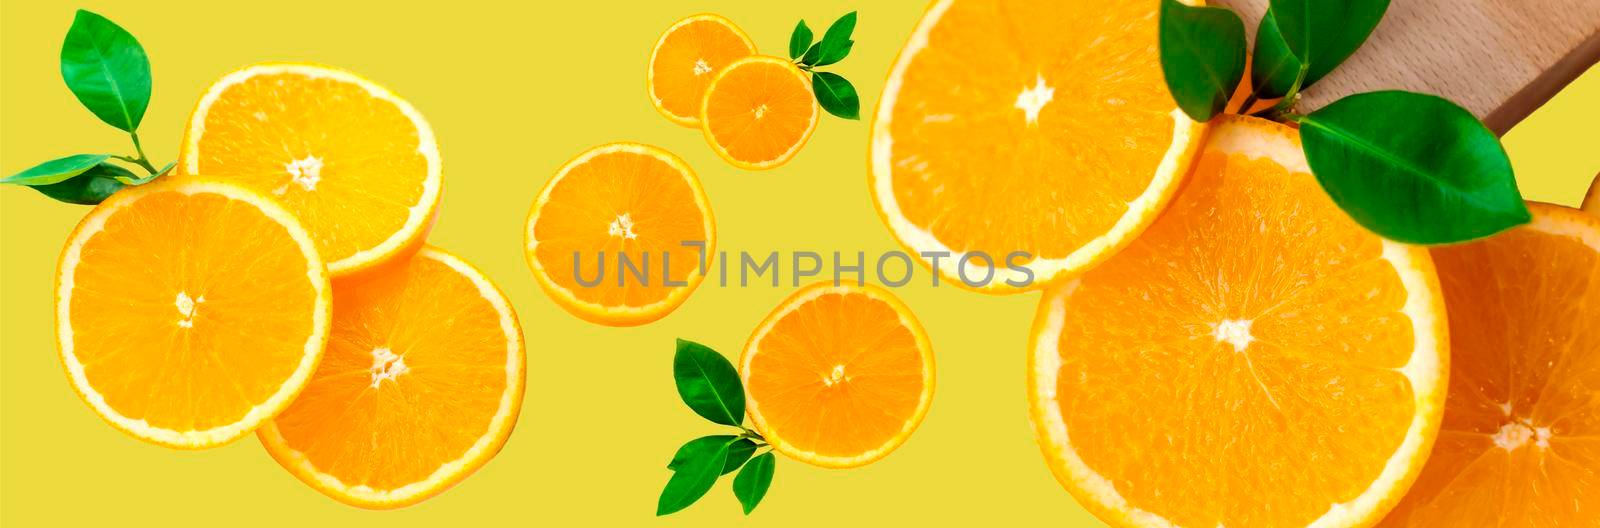 Sliced orange on a bright orange background. Oranges in the panoramic image. Panorama, a banner with space for text or insertion. Pieces of citrus fruit. Template for creative and graphic works.